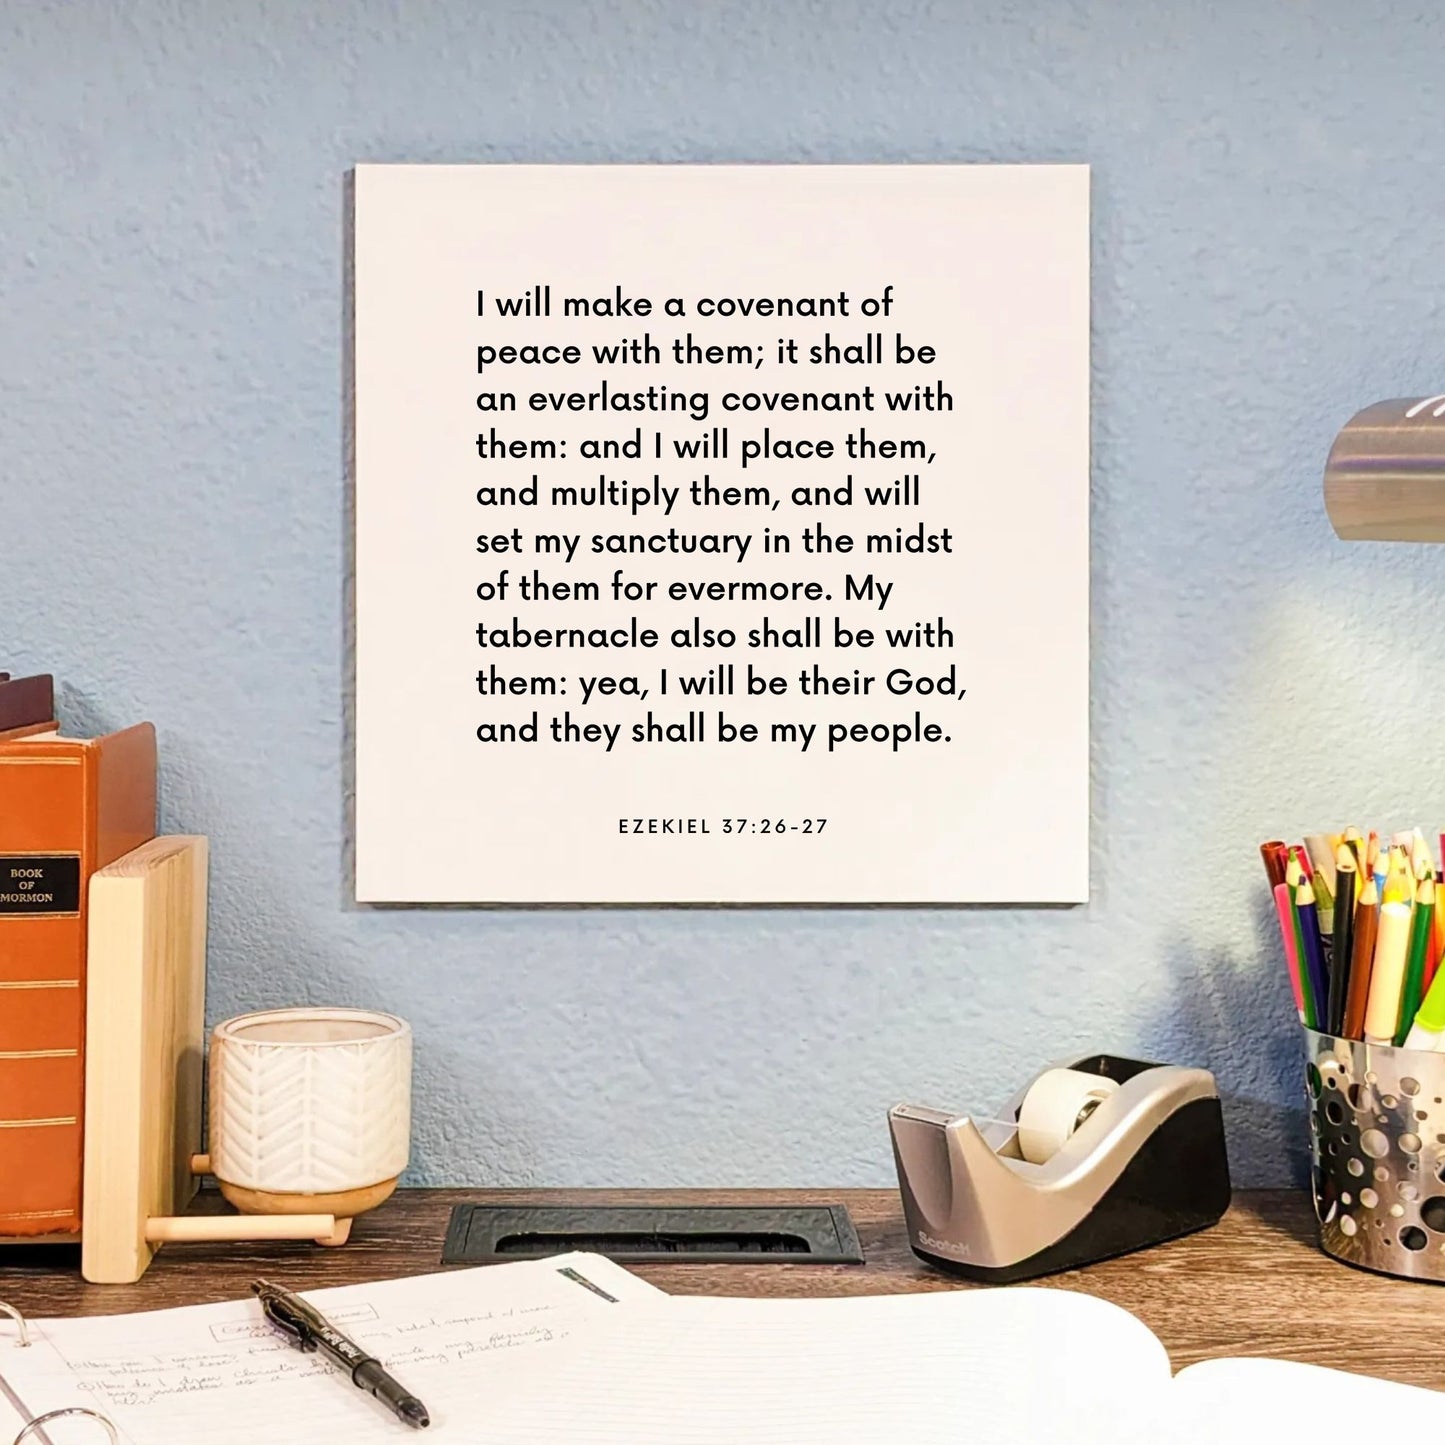 Desk mouting of the scripture tile for Ezekiel 37:26-27 - "I will be their God, and they shall be my people"